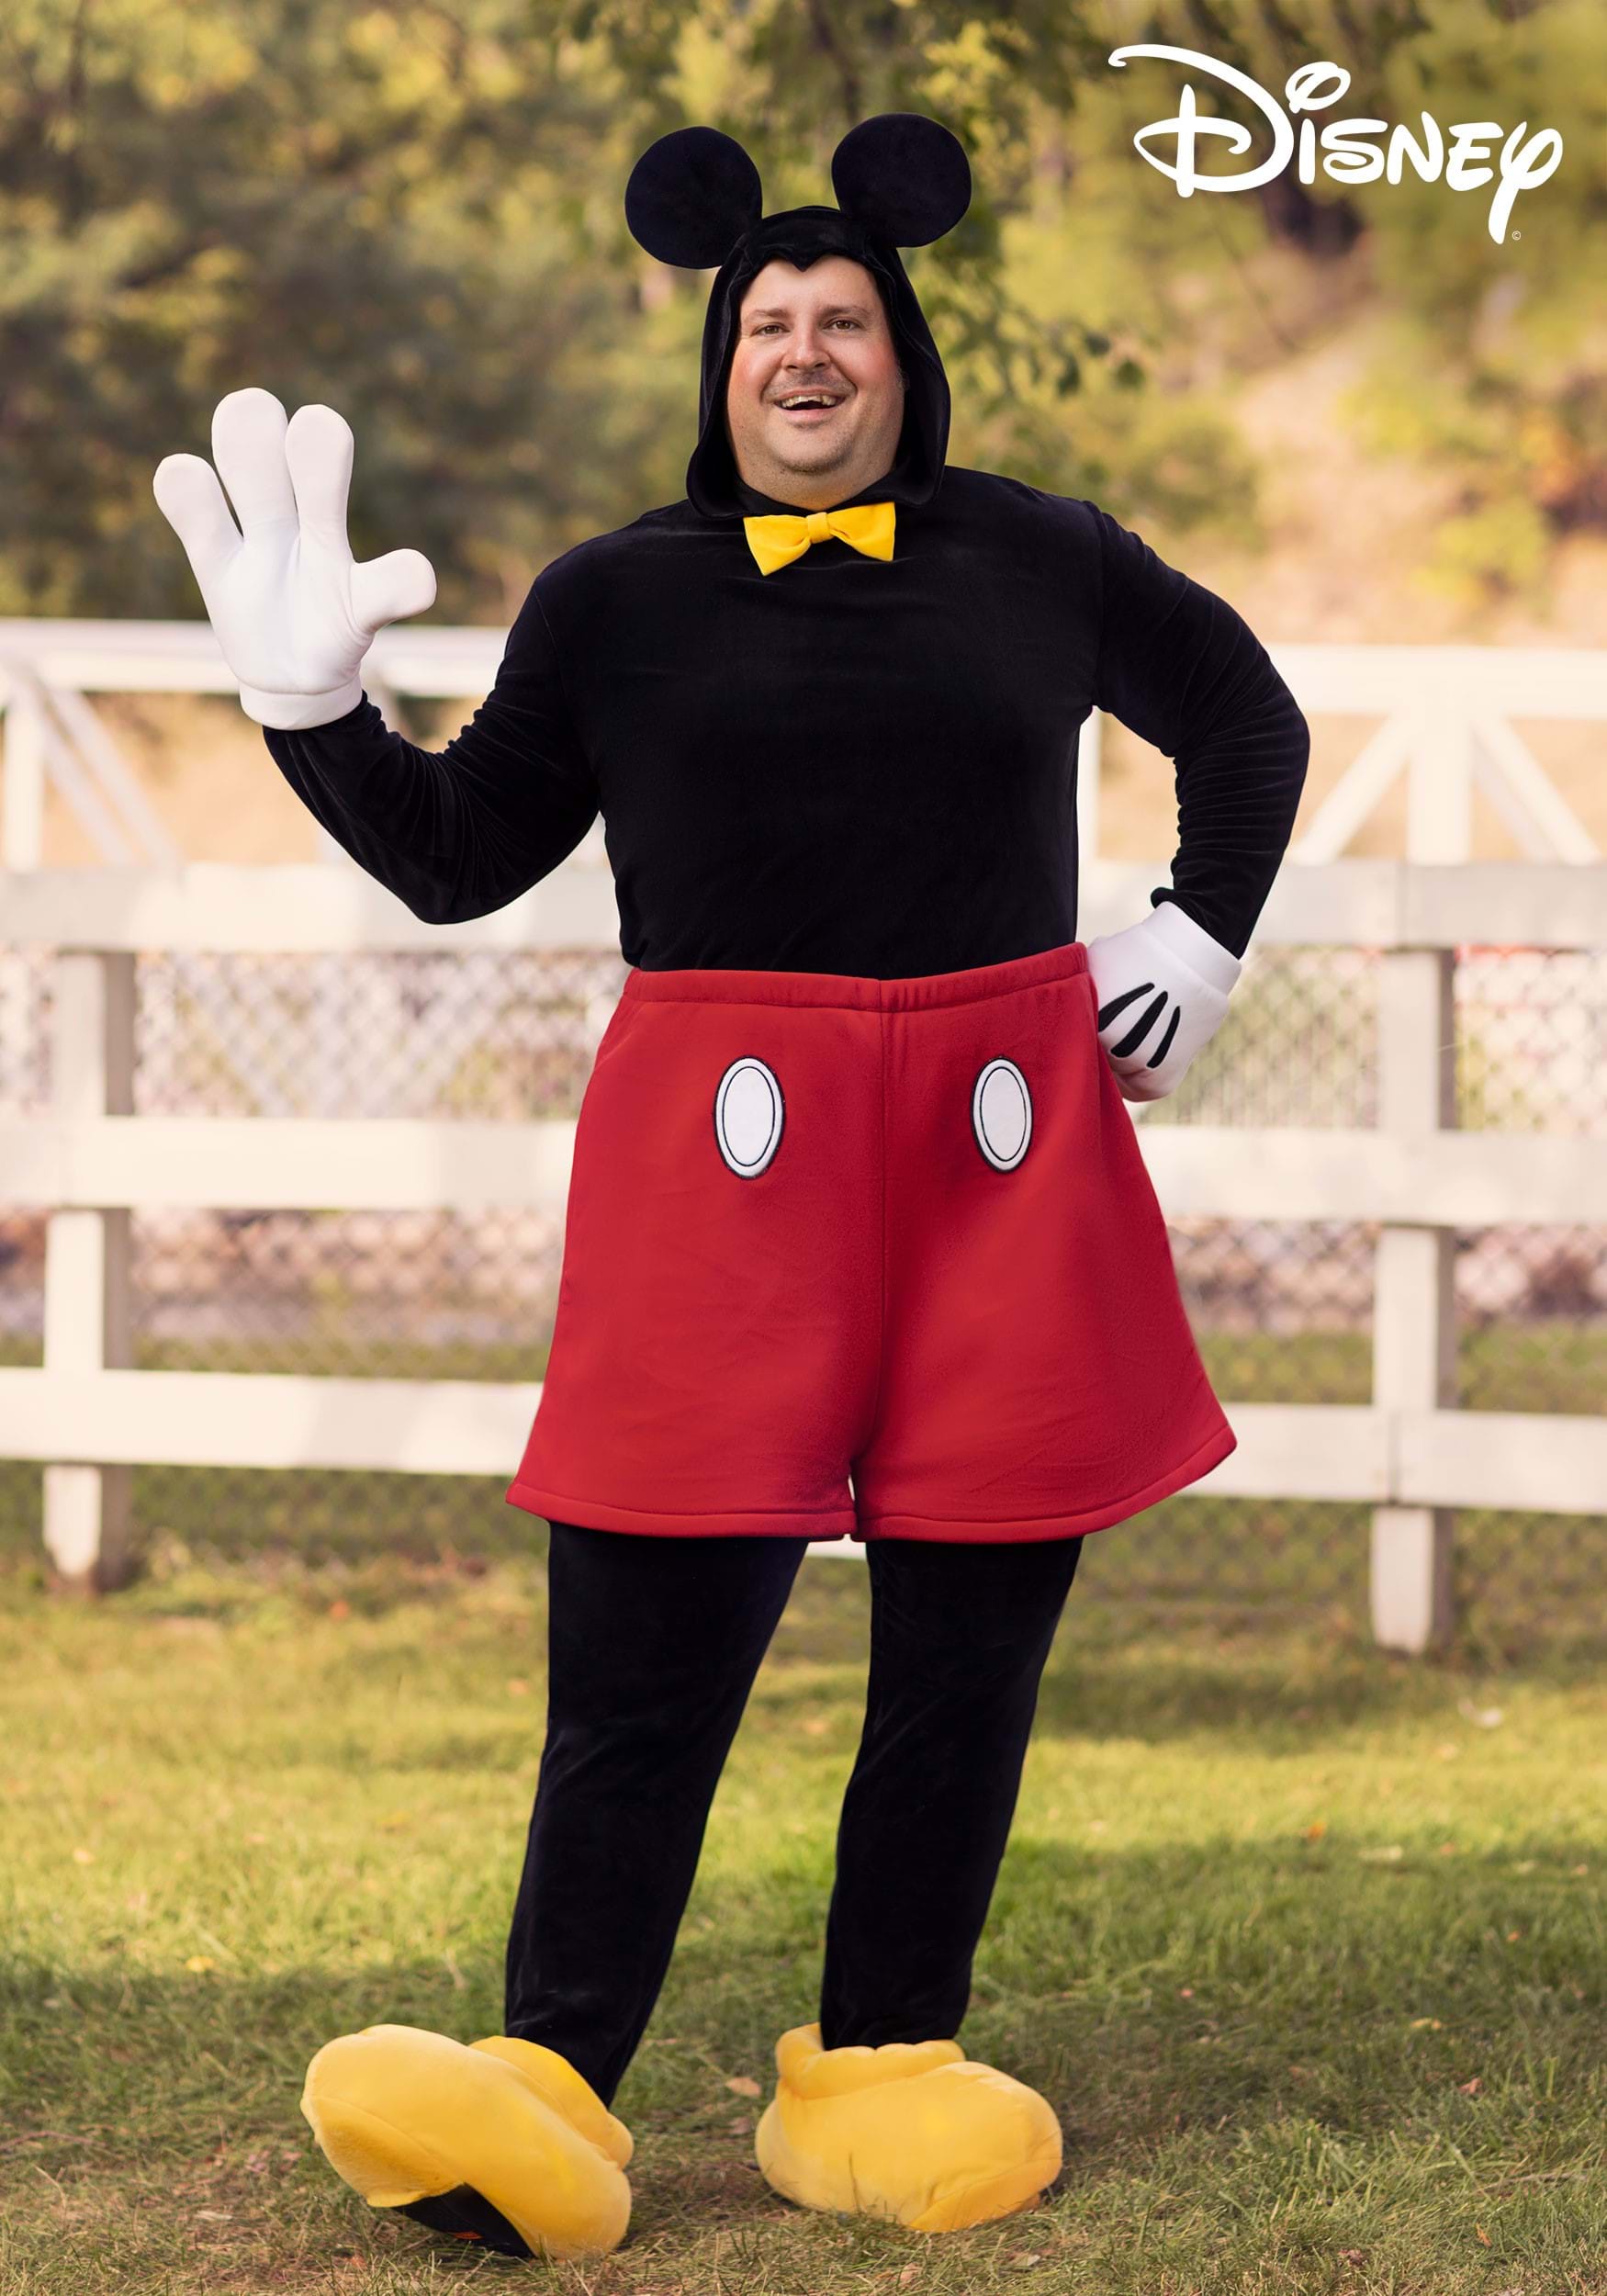 Adult Plus Size Disney Deluxe Mickey Mouse Costume